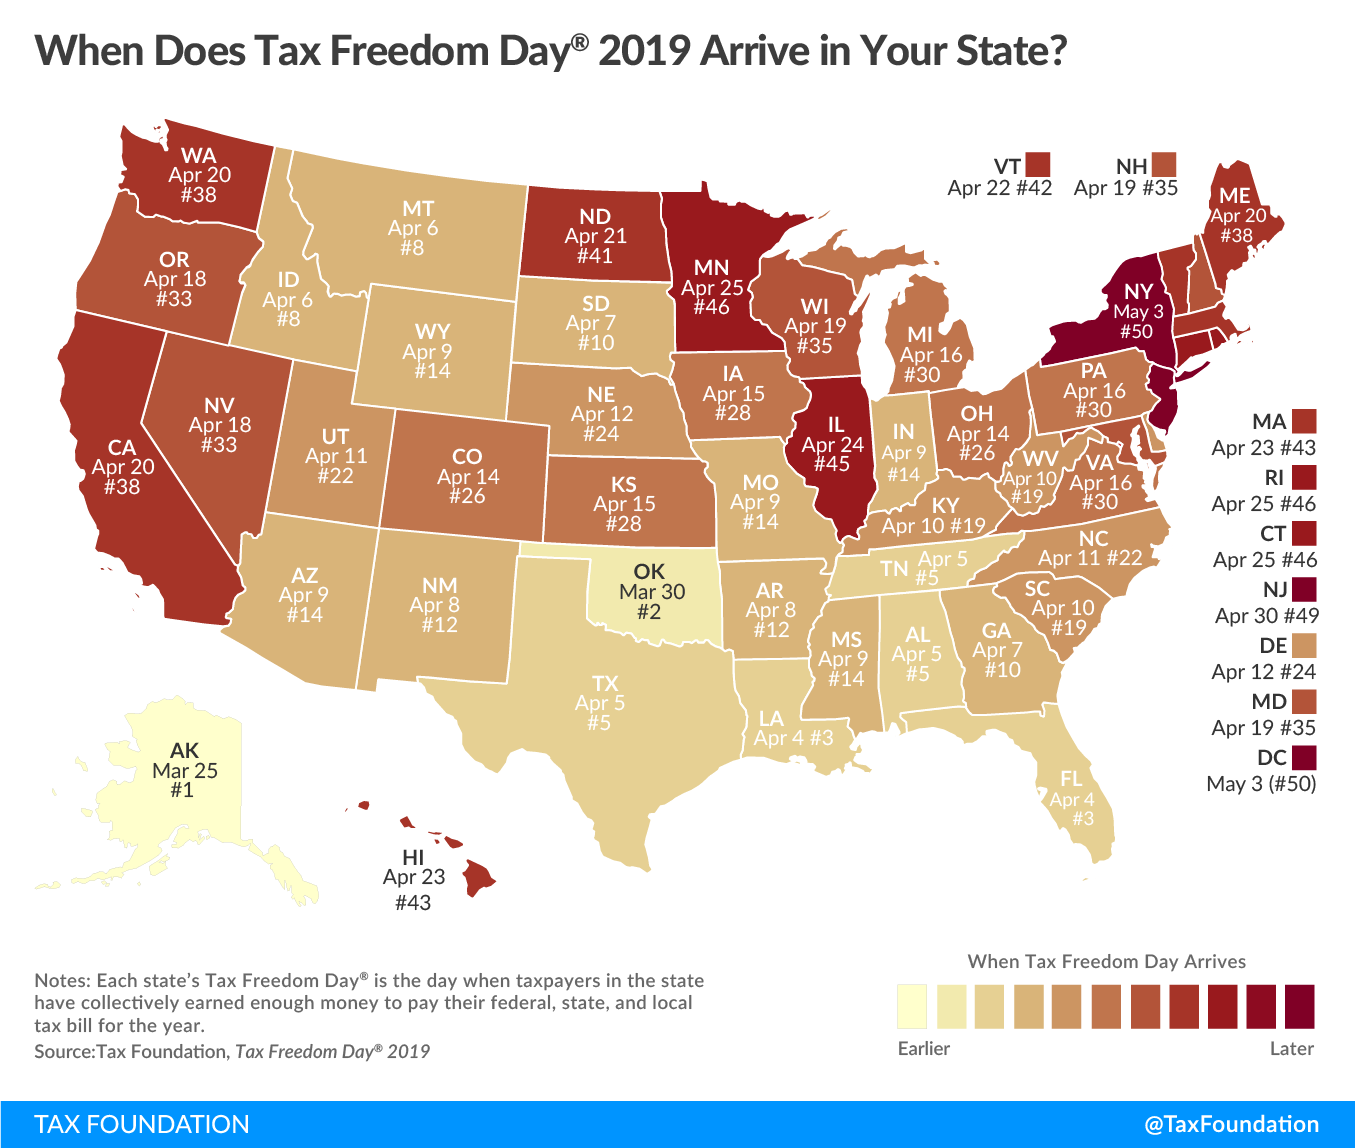 2019 Tax Freedom Day 2019 in your state